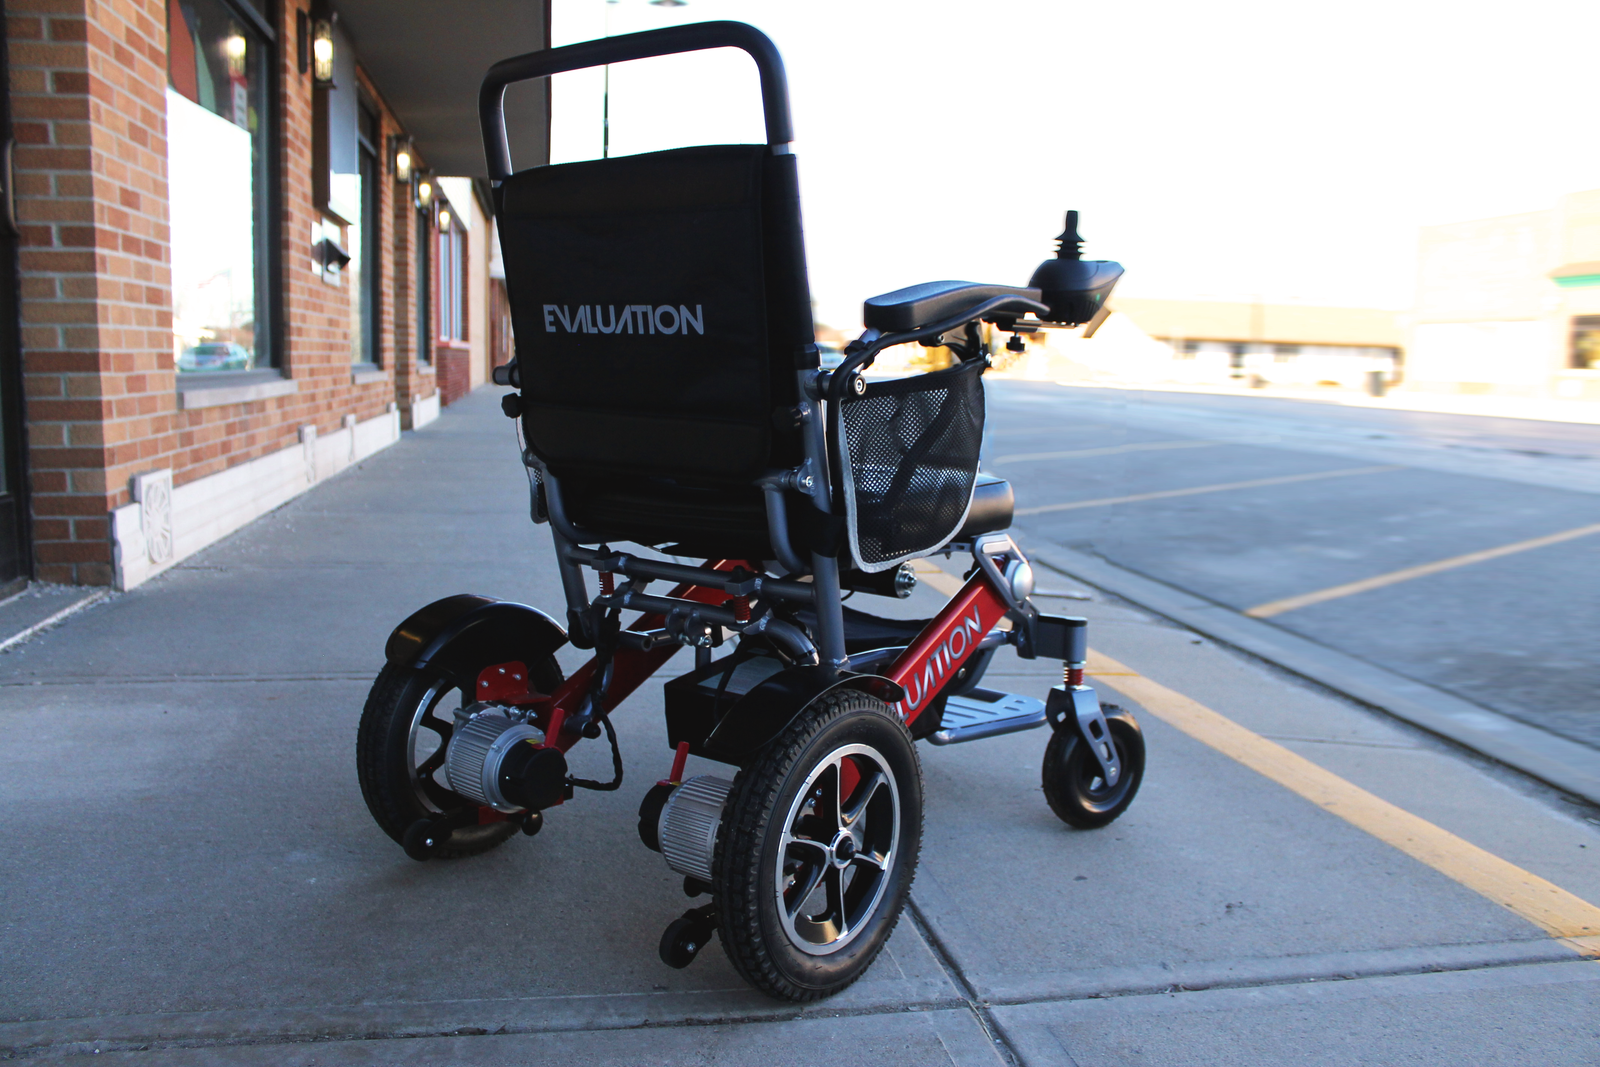 The Evaluation Evolution: The Leading Fully Automatic Folding Power Wheelchair